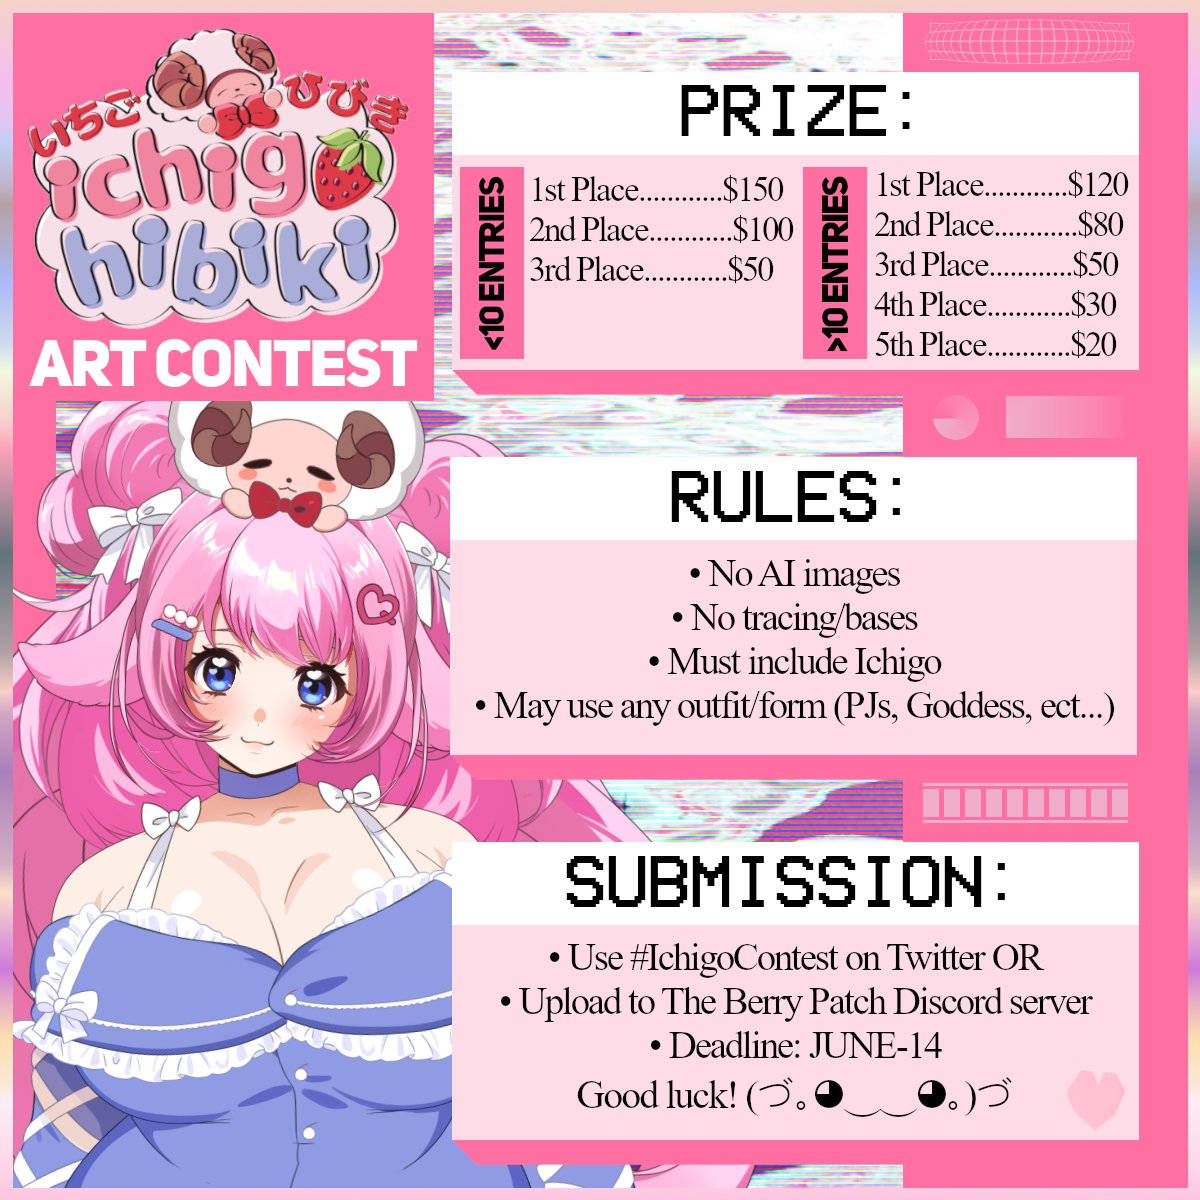 Since my 2.0 debut is soon why not host a $300 art contest for you cuties!!

🍓Please make sure to use #IchigoContest or post on the discord server to submit your art so I can admire it 😍 Lamb Mommy can't wait to see them 
*REF SHEET DOWN BELOW*
Rts are appreciated
#Vtuber